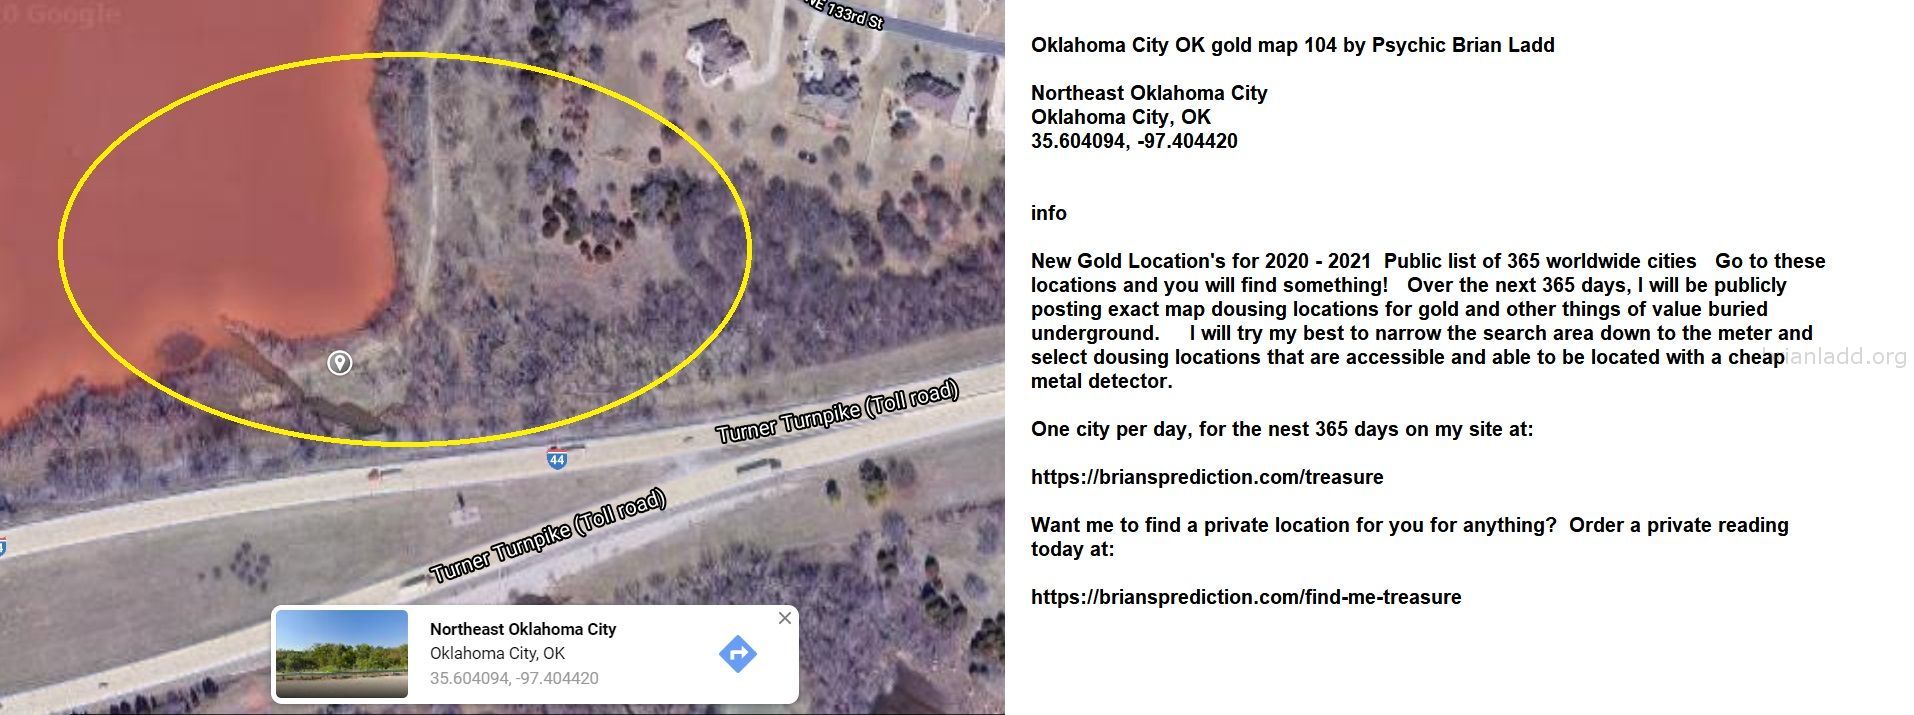 Oklahoma City Ok Gold Map 104 By Psychic Brian Ladd - Oklahoma City Ok Gold Map 104 By Psychic Brian Ladd  Northeast Okl...
Oklahoma City Ok Gold Map 104 By Psychic Brian Ladd  Northeast Oklahoma City  Oklahoma City, Ok  35.604094, -97.404420  Info  New Gold Location'S For 2020 - 2021  Public List Of 365 Worldwide Cities  Go To These Locations And You Will Find Something!  Over The Next 365 Days, I Will Be Publicly Posting Exact Map Dousing Locations For Gold And Other Things Of Value Buried Underground.  I Will Try My Best To Narrow The Search Area Down To The Meter And Select Dousing Locations That Are Accessible And Able To Be Located With A Cheap Metal Detector.  One City Per Day, For The Nest 365 Days On My Site At:   https://briansprediction.com/Treasure  Want Me To Find A Private Location For You For Anything?  Order A Private Reading Today At:   https://briansprediction.com/Find-Me-Treasure
